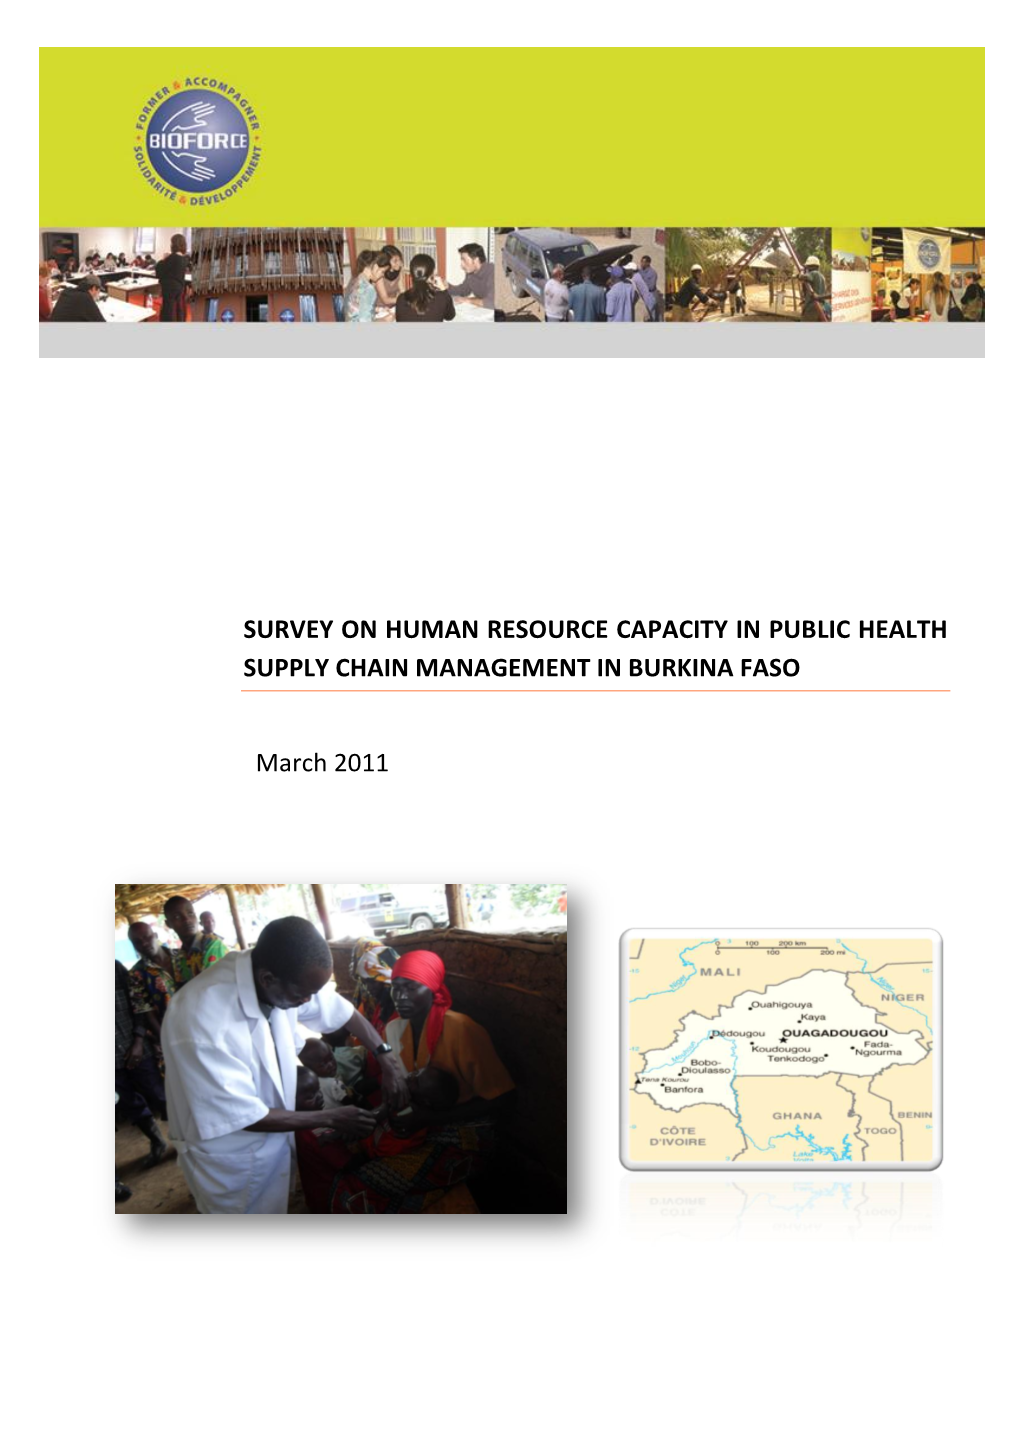 Survey on Human Resource Capacity in Public Health Supply Chain Management in Burkina Faso